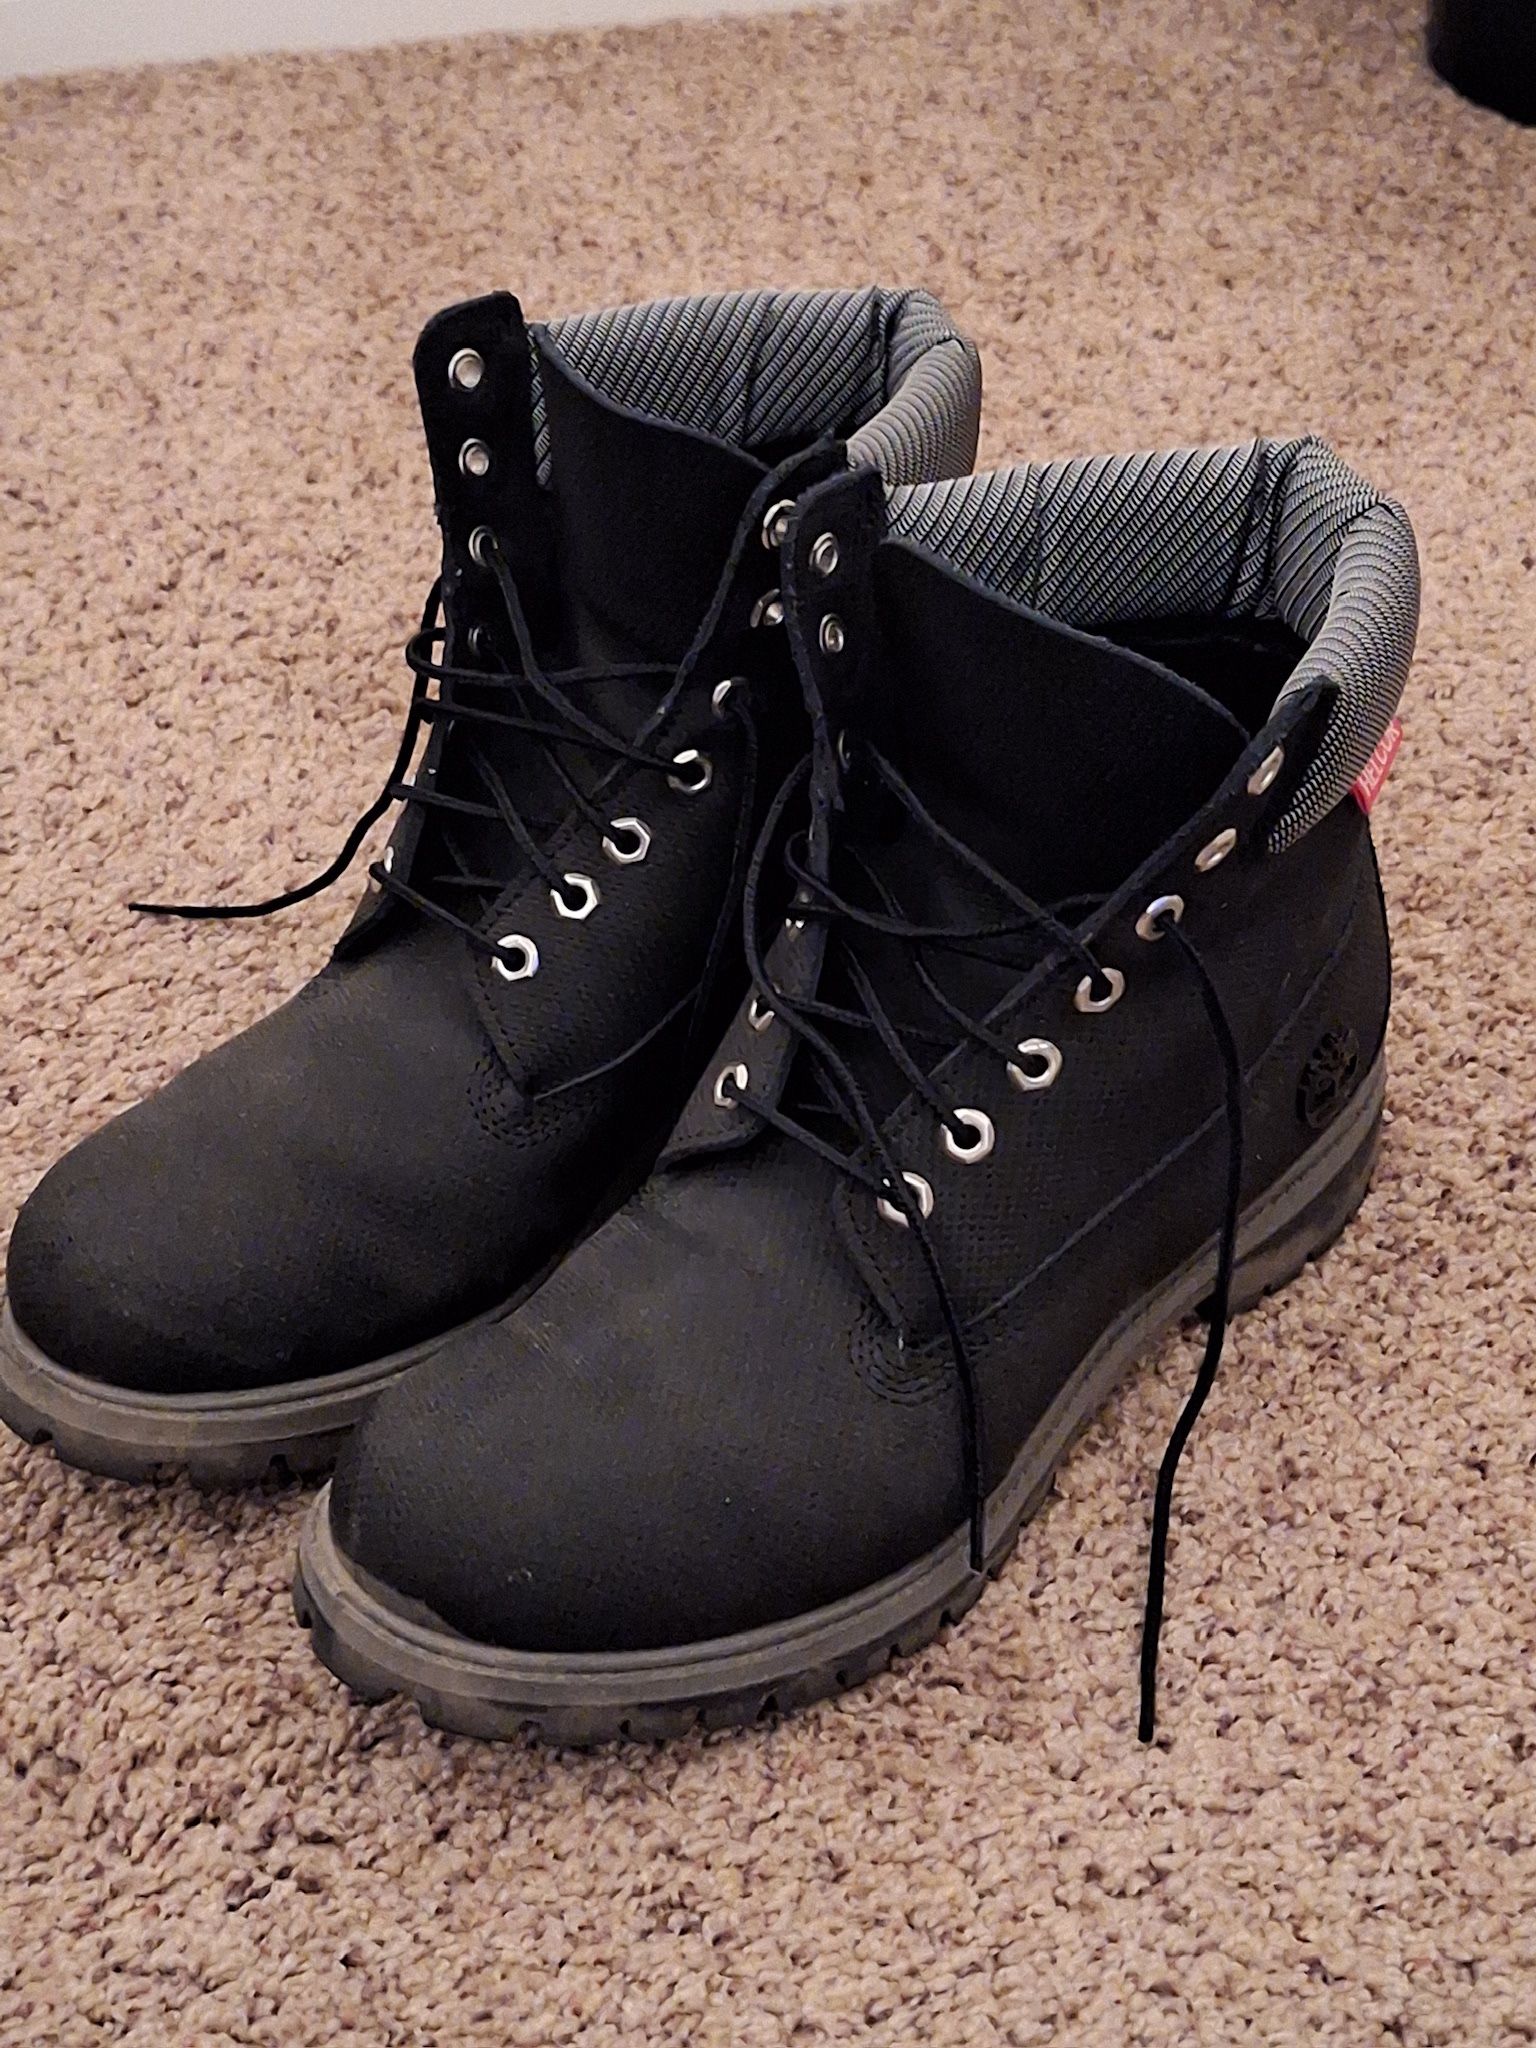 Size 11 Men’s Helcor Timberlands Boots